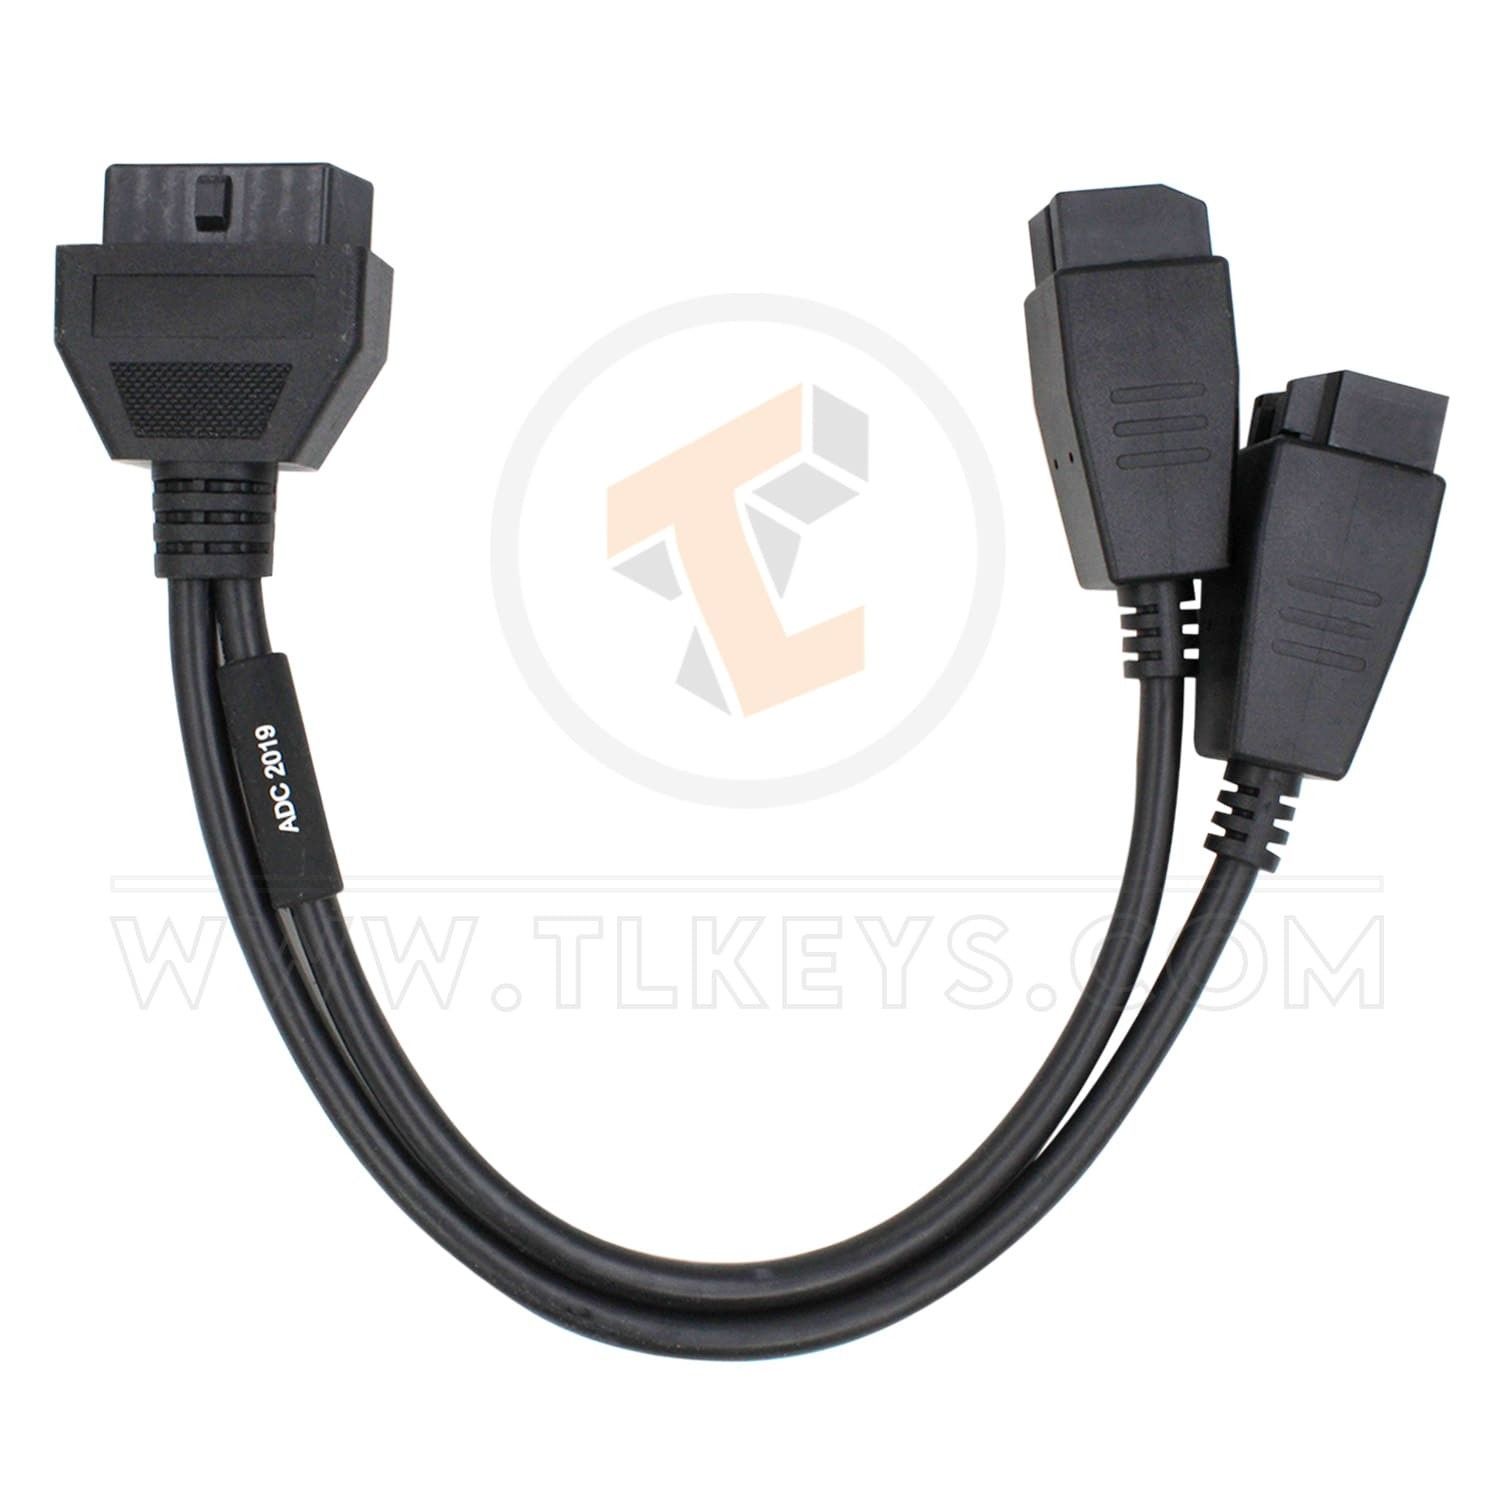 cables AD Gateway Bypass Cable (FCA) for Fiat ADC2019